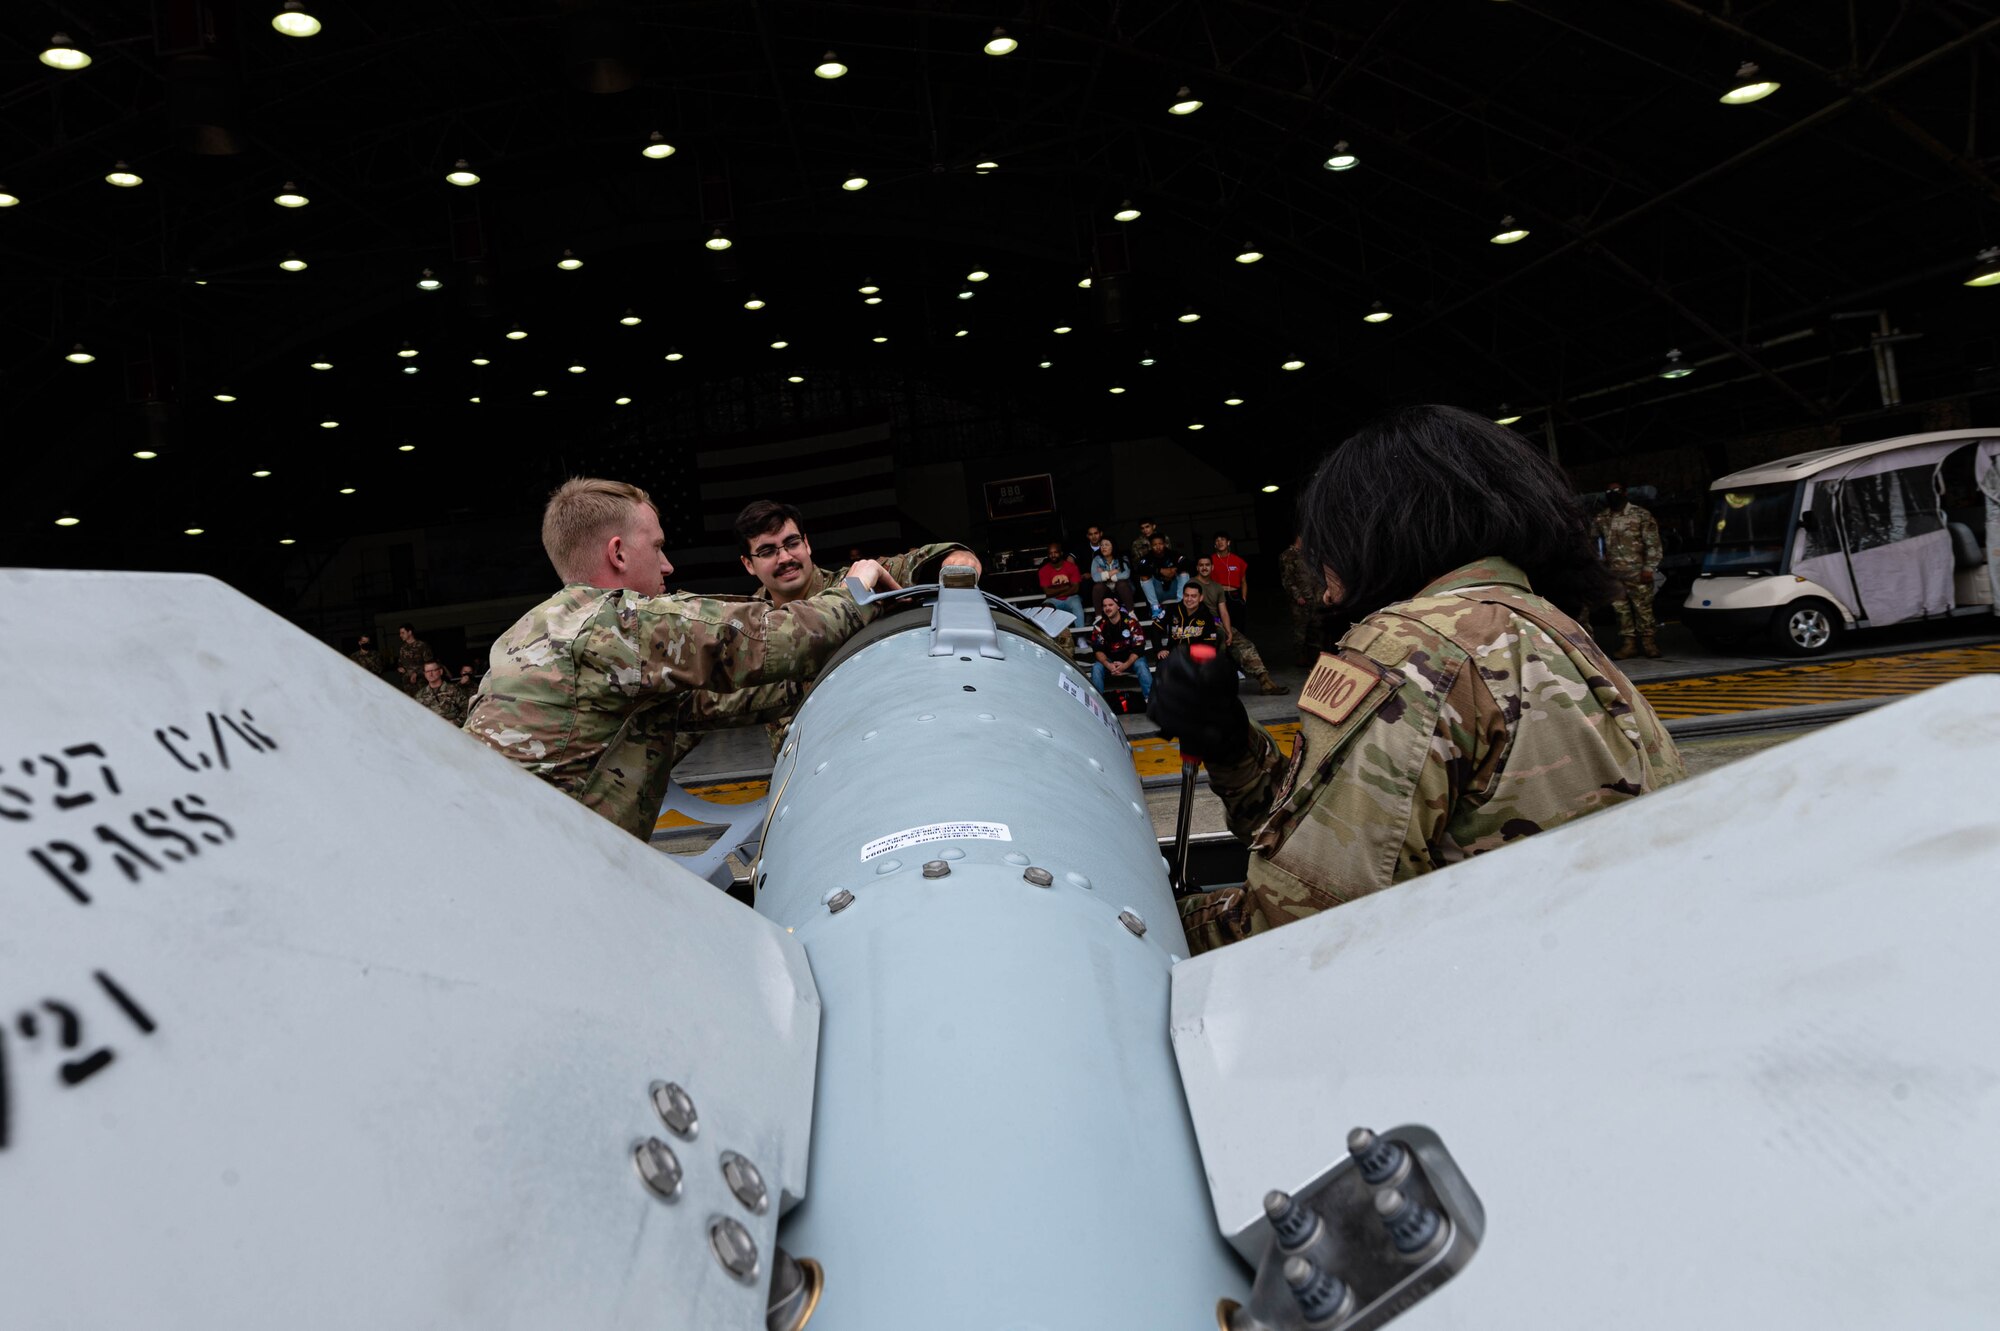 Airmen from the 51st Maintenance Group build a munition at the 3rd quarter load competition